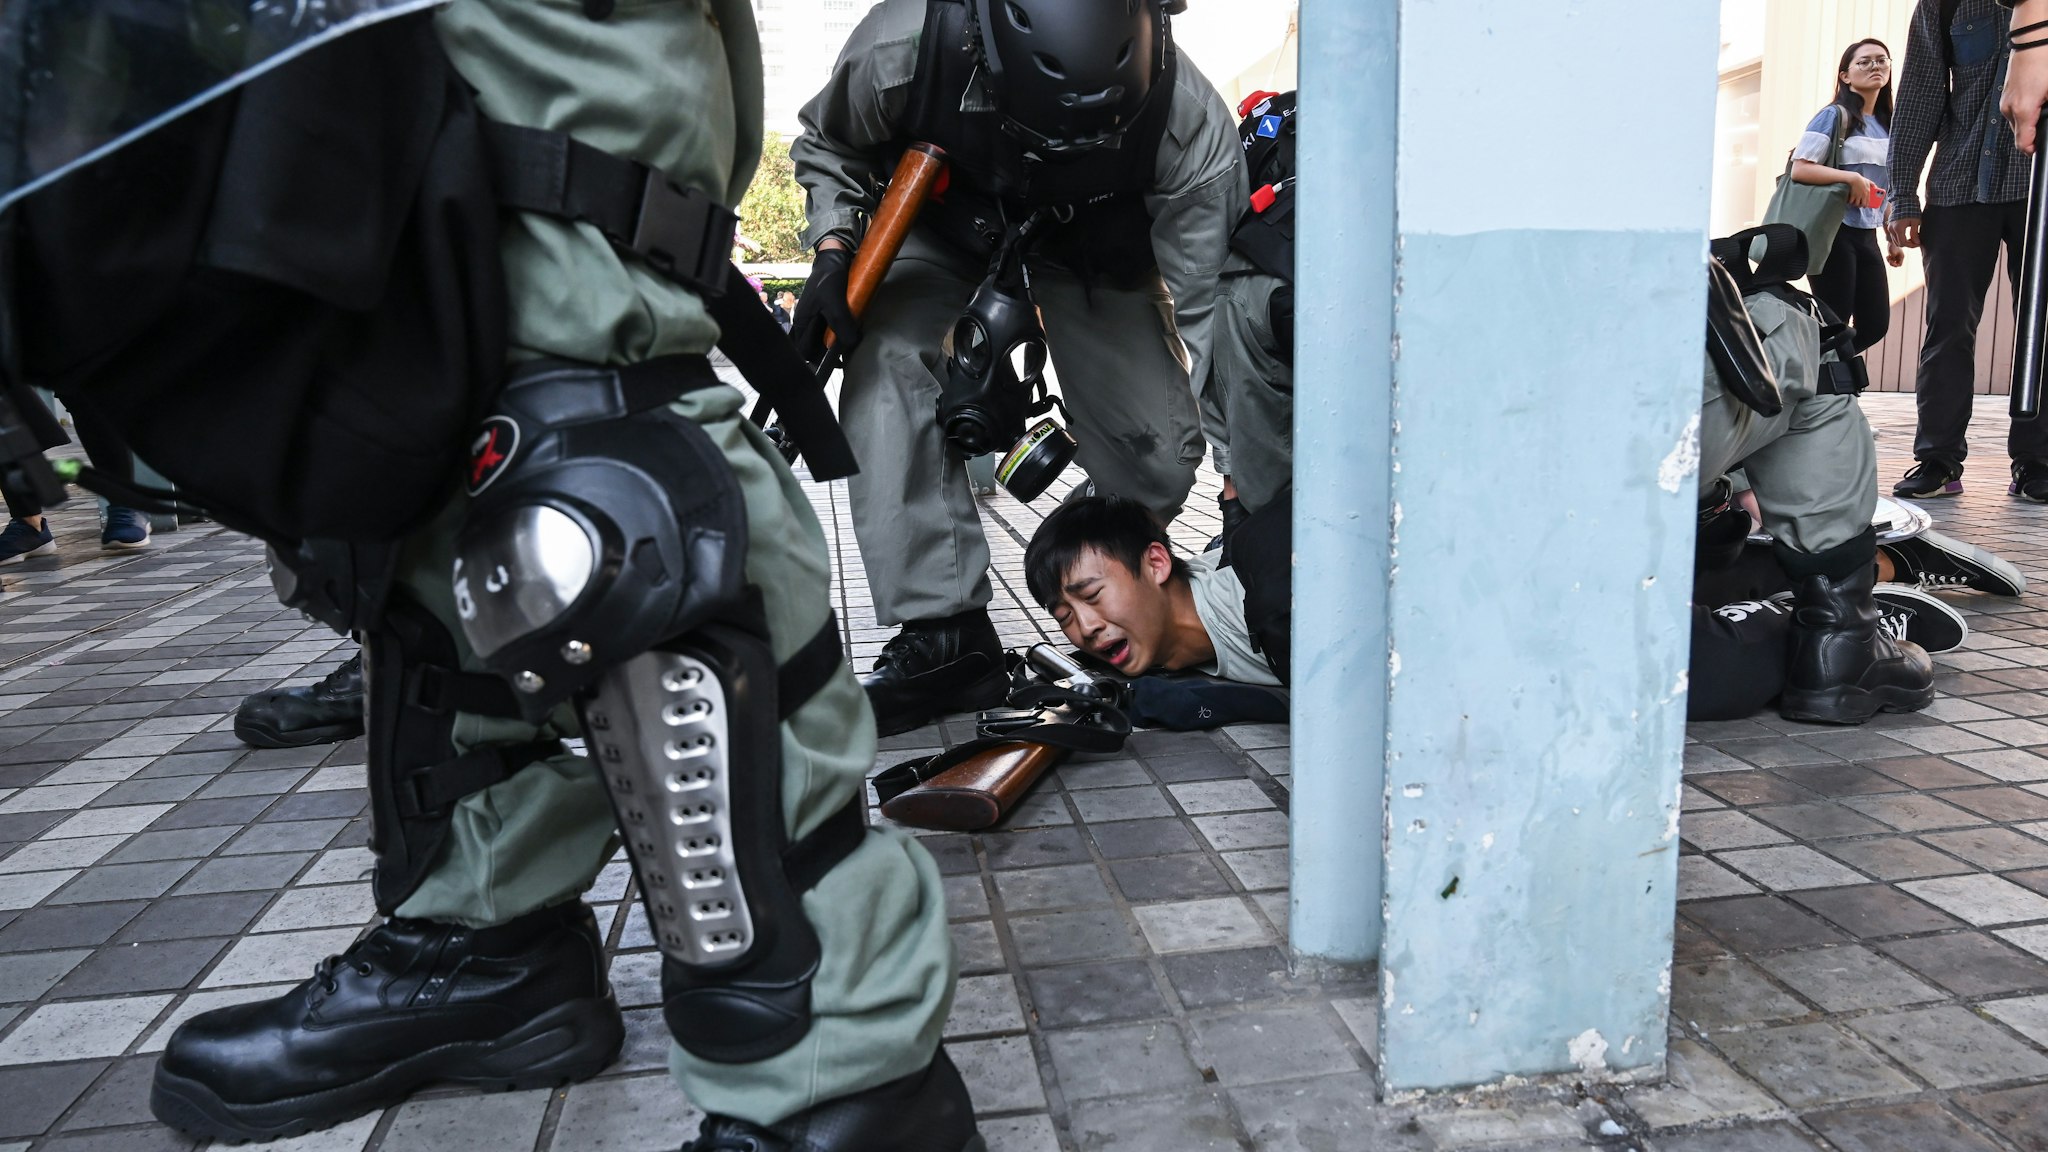 HONG KONG, CHINA - NOVEMBER 11: A protestor arrested by riot police in Wong Tai Sin district on November 11, 2019 in Hong Kong, China. Anti-government protesters organized a general strike on Monday as demonstrations in Hong Kong stretched into its sixth month with demands for an independent inquiry into police brutality, the retraction of the word "riot" to describe the rallies, and genuine universal suffrage. (Photo by Billy H.C. Kwok/Getty Images)